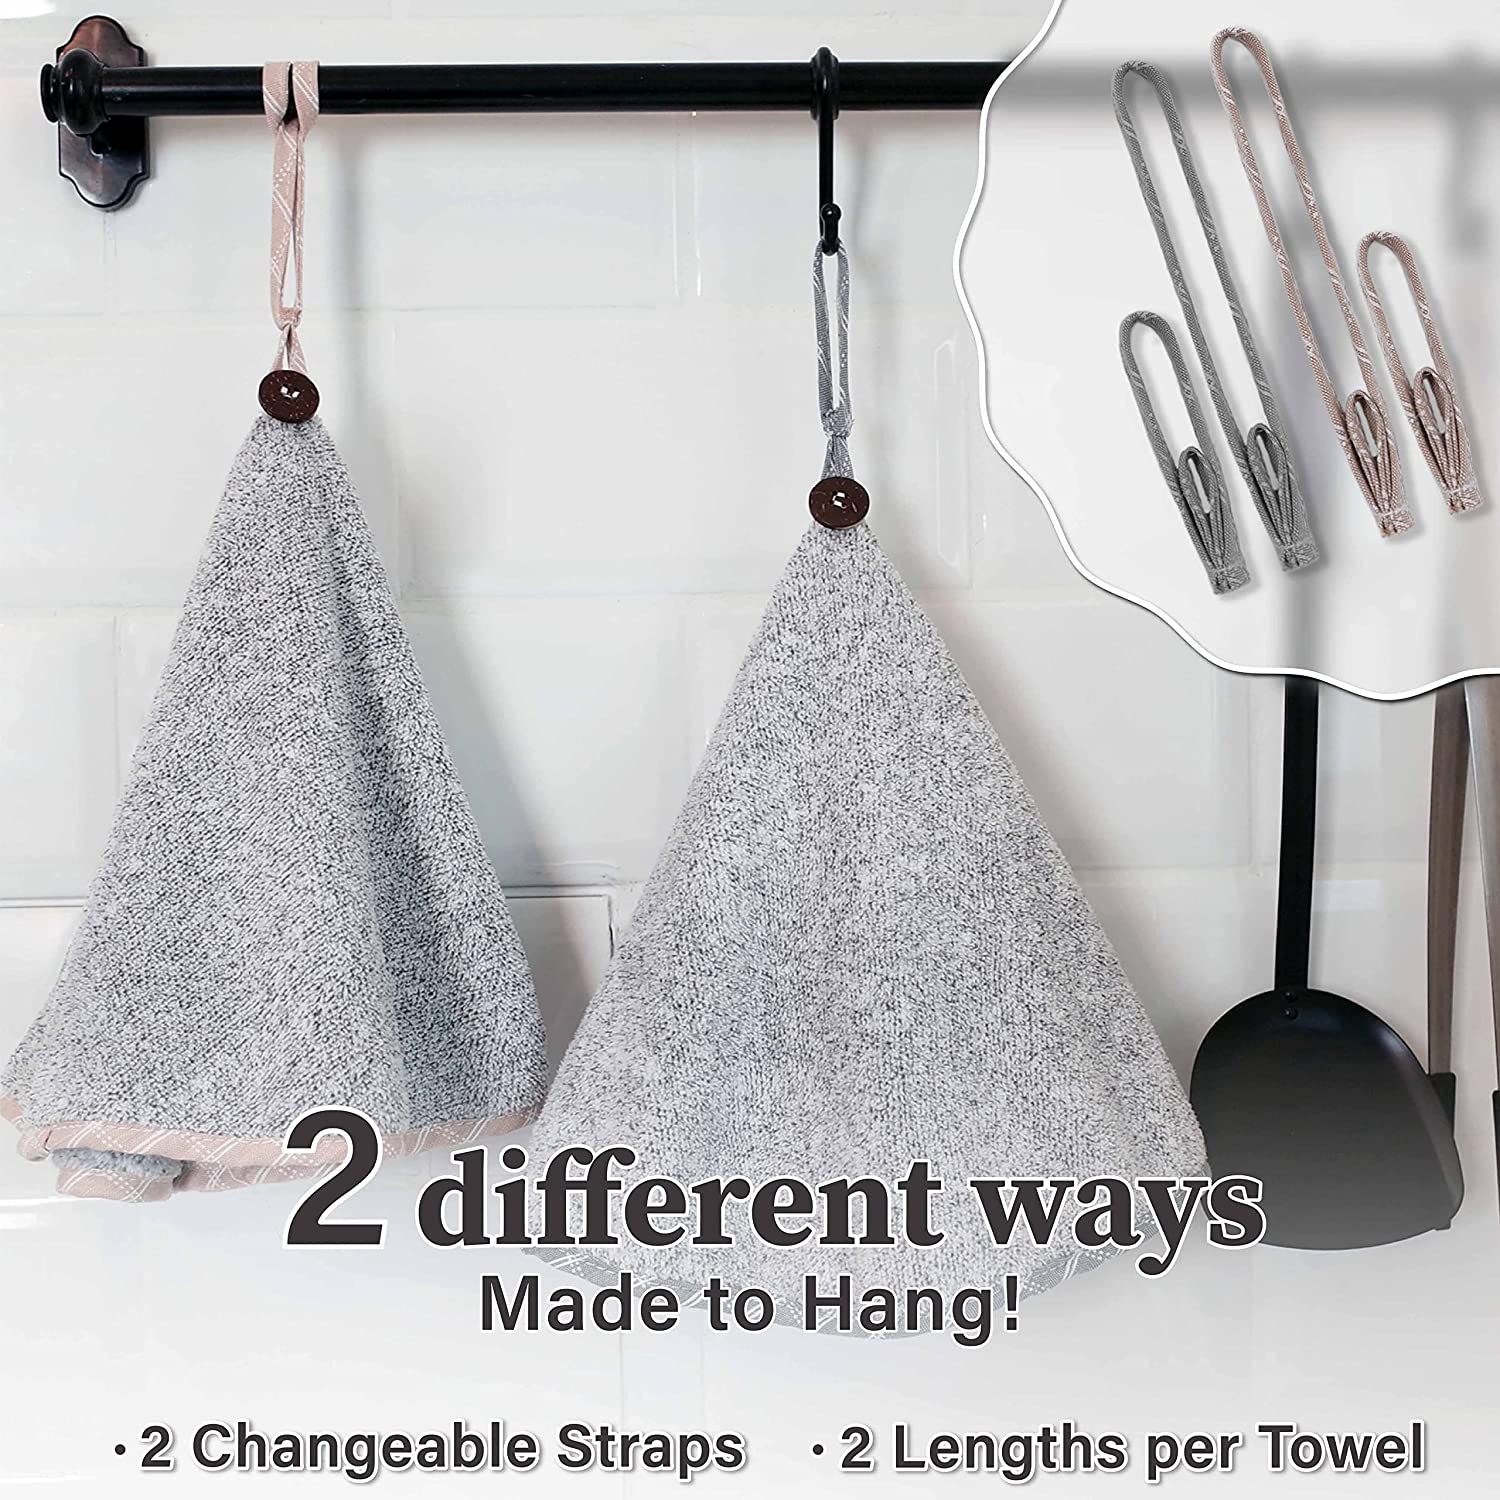  Grey Hand Towels with Hanging Loops - Set of 2 Gray